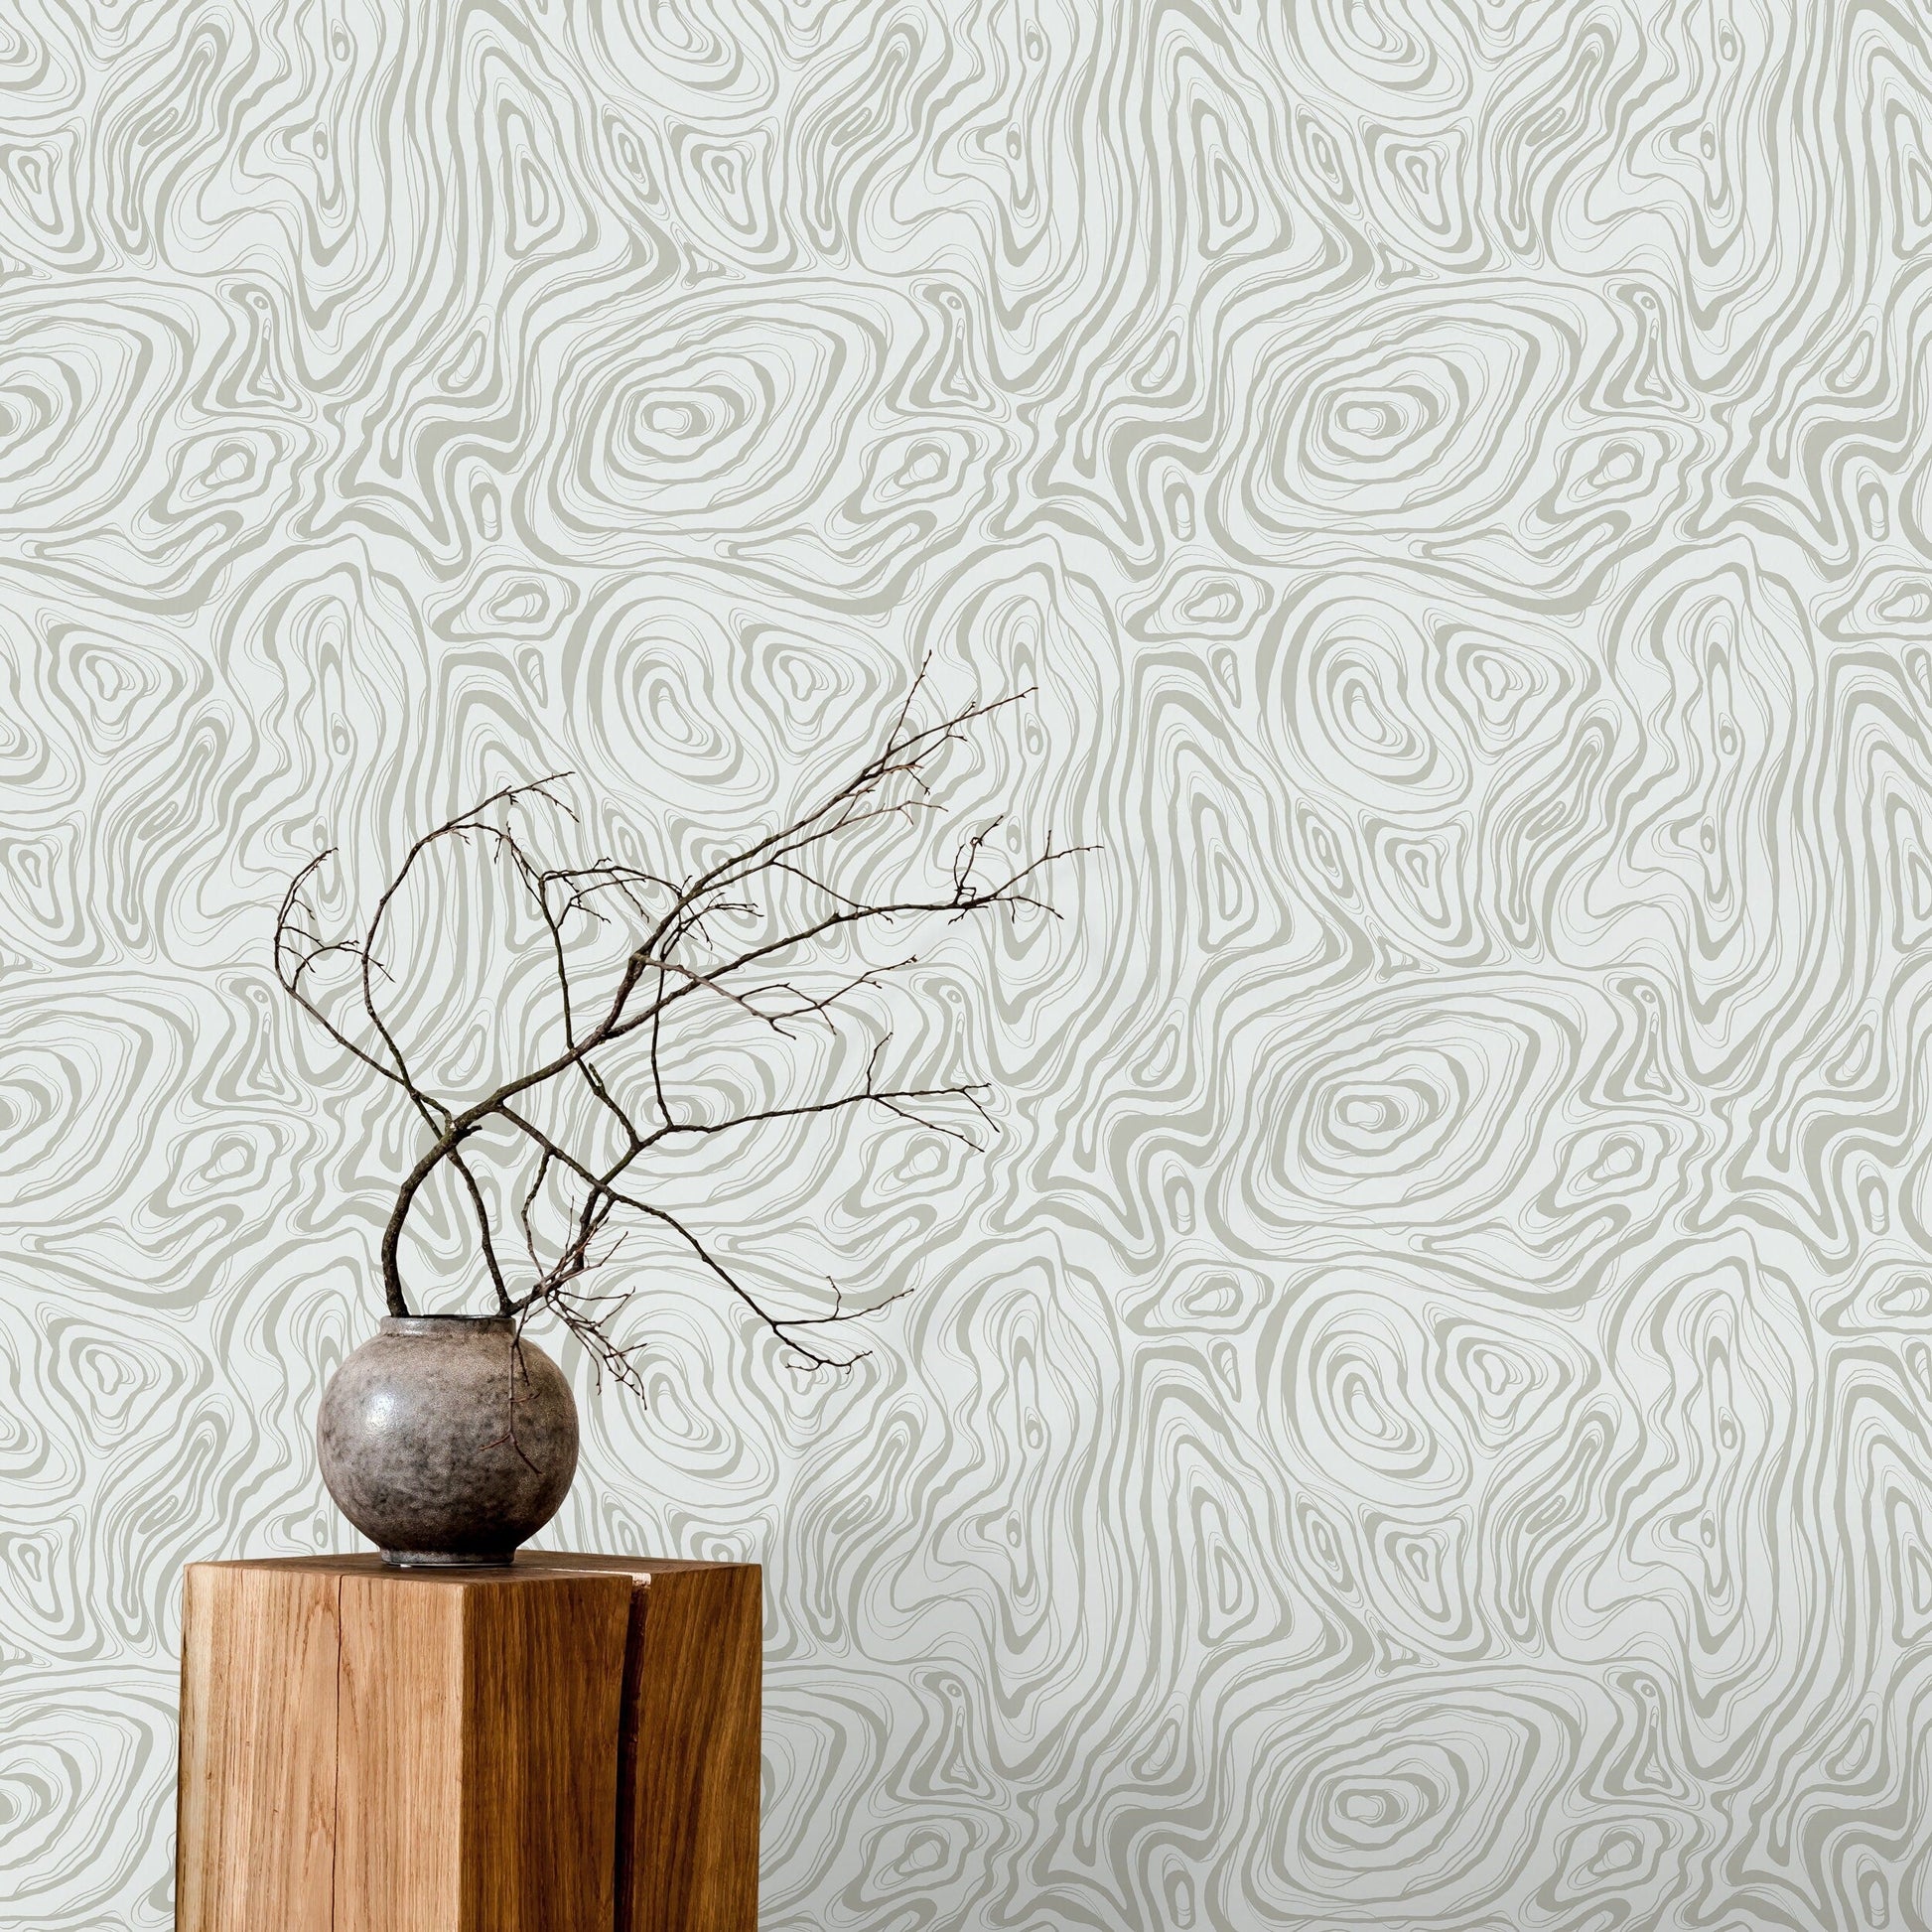 Gray Abstract Waves Wallpaper / Peel and Stick Wallpaper Removable Wallpaper Home Decor Wall Art Wall Decor Room Decor - C645